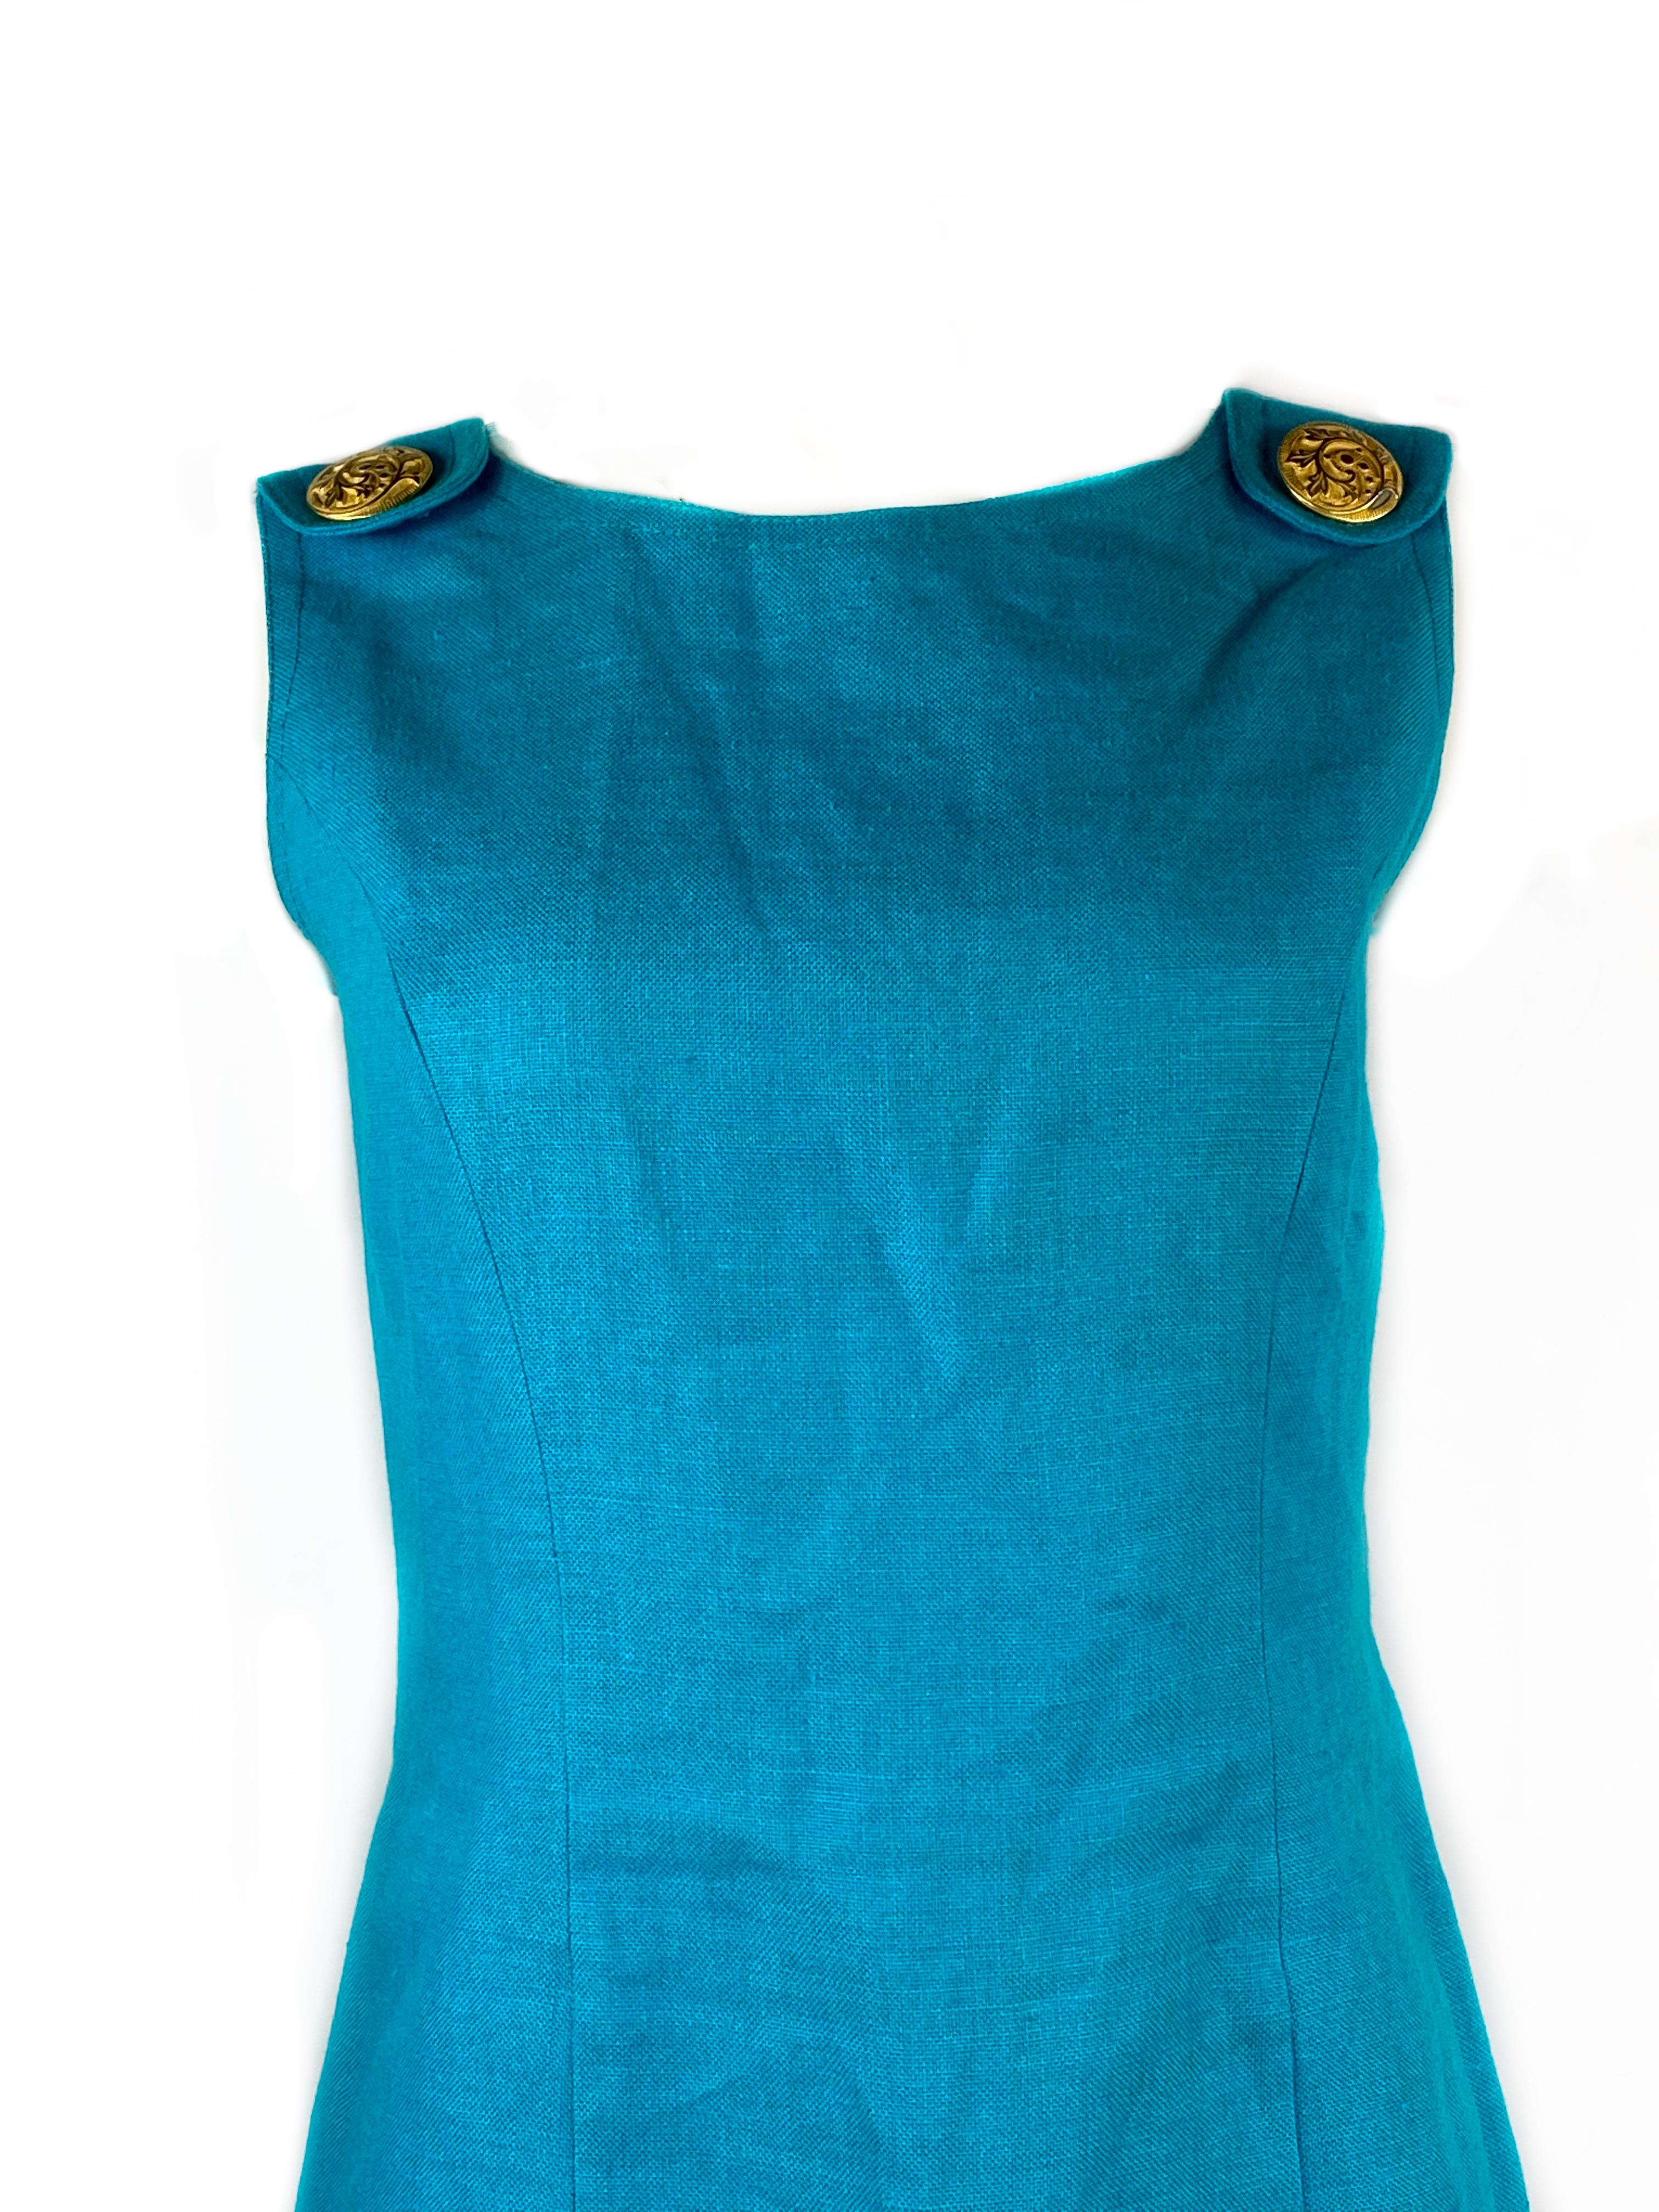 Vintage SCAASI Blue Turquoise Linen Sleeveless Mini Dress w/ Gold Buttons Size 4 2